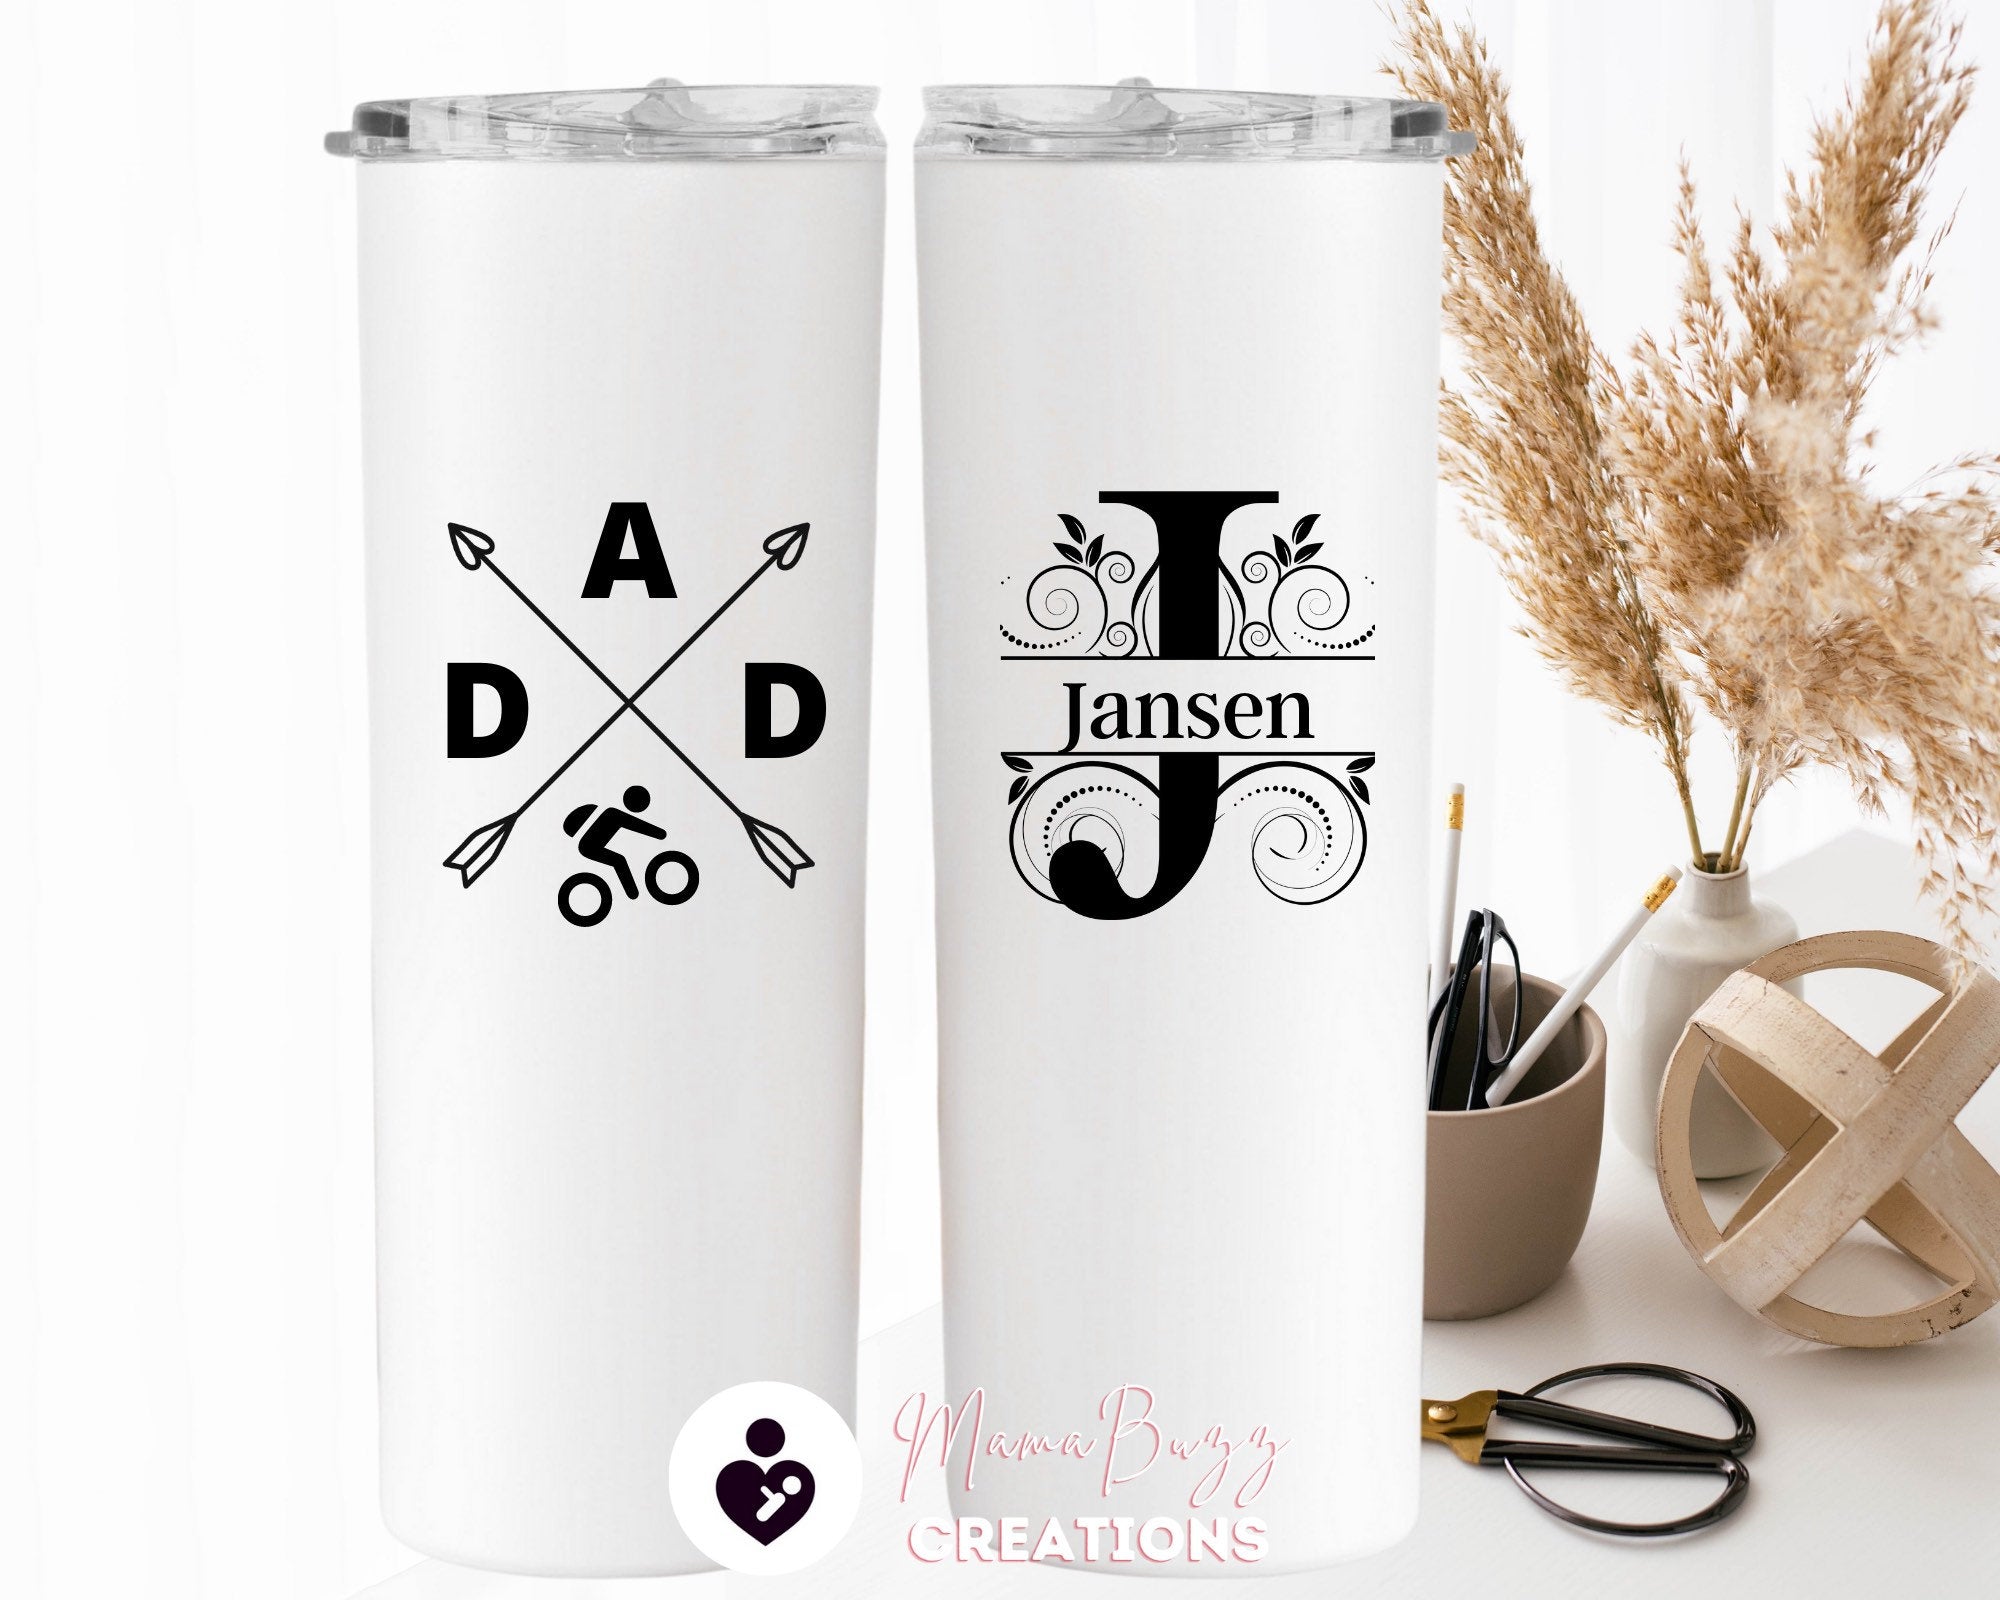 World’s Best Dad,Custom Tumbler,Gifts for Dad, Father’s Day, Gifts for Him, Birthday Gift, Father’s Day Gift, Anniversary Gifts,Dad Gifts - MamaBuzz Creations